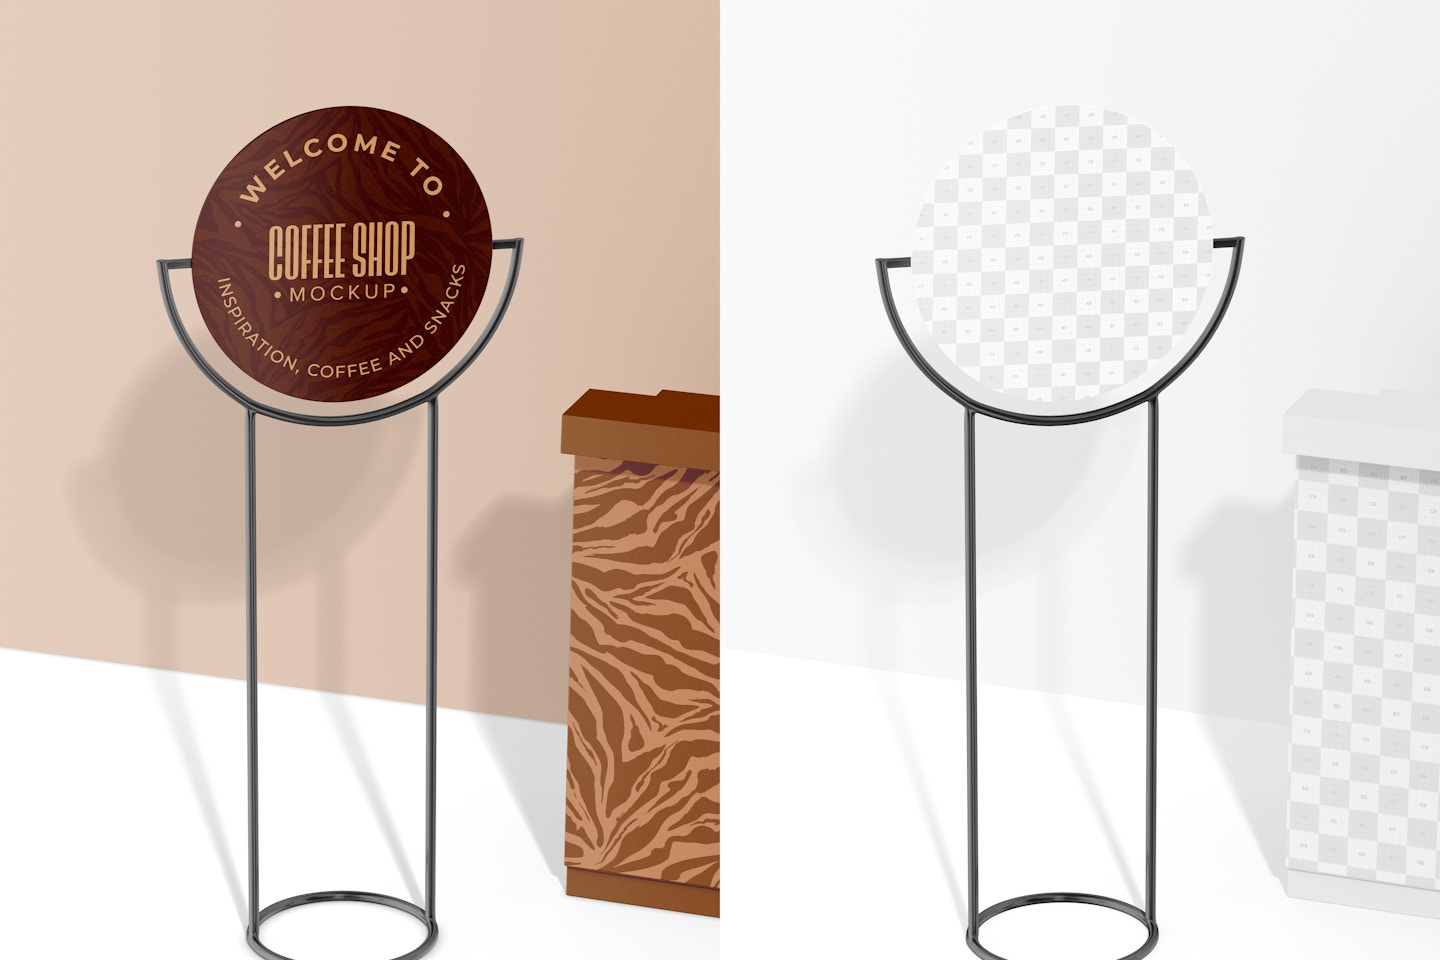 Outdoor Coffee Shop Sign Mockup, with Counter